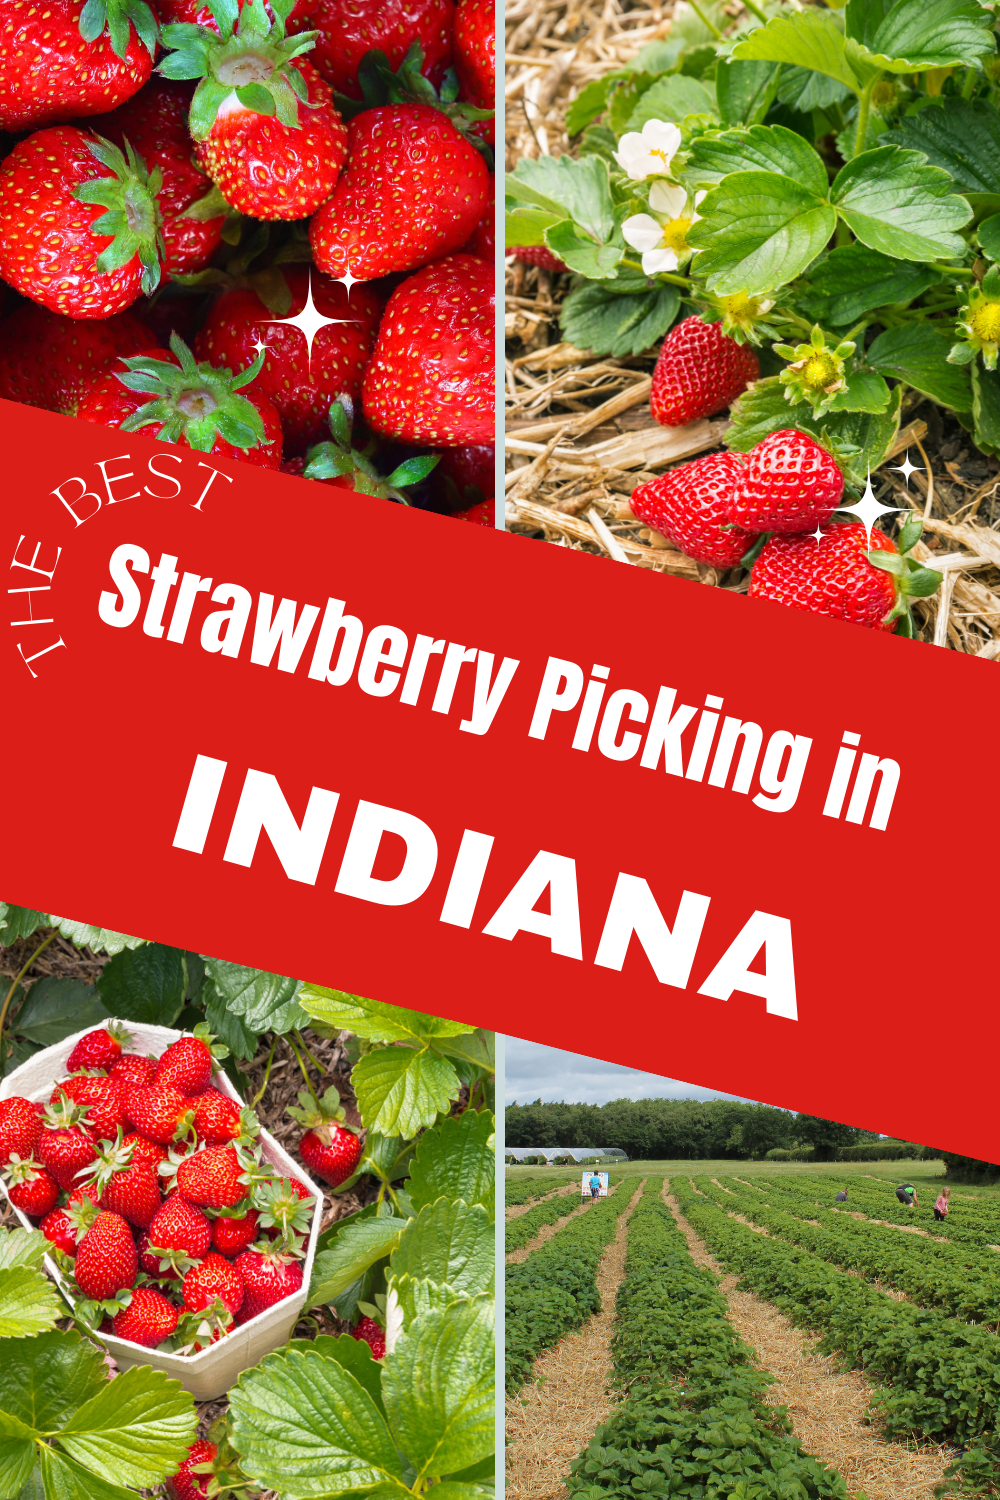 Best Indiana Strawberry Picking Farms